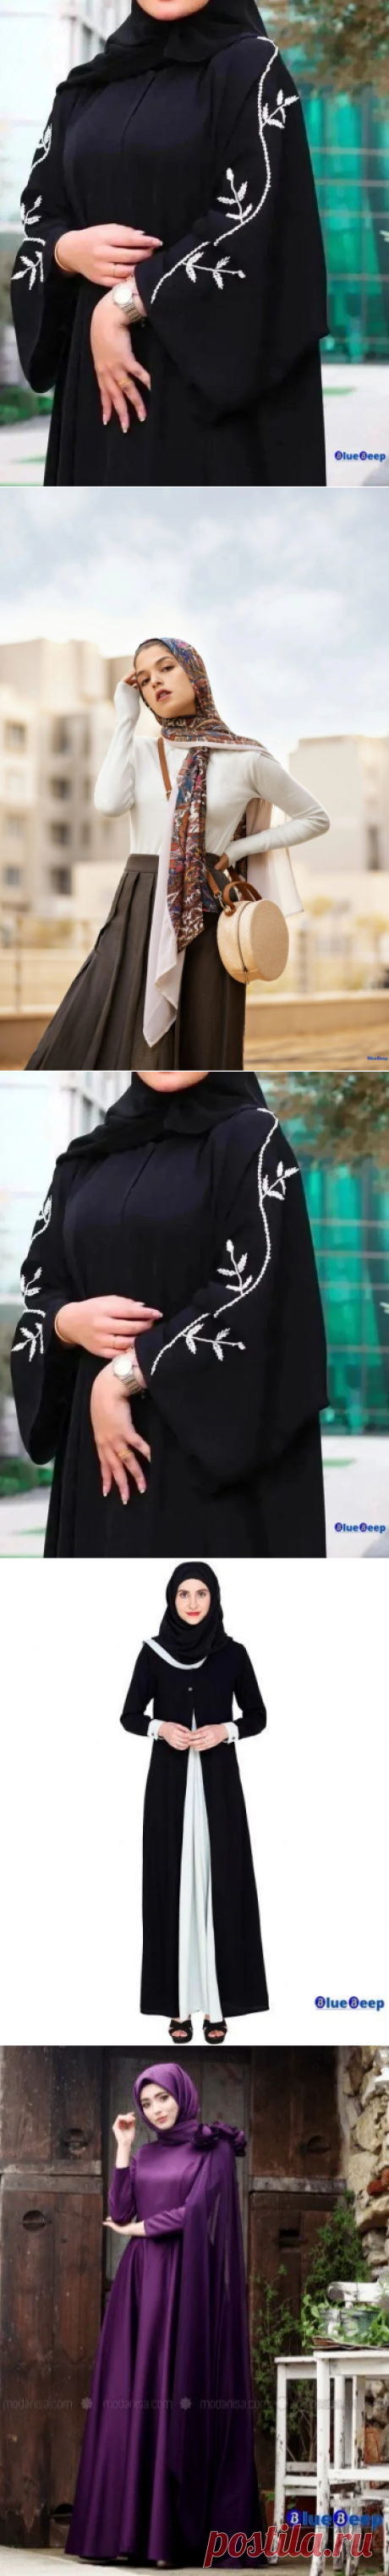 The Evolution of Abayas: From Traditional Garment to Fashion Statement